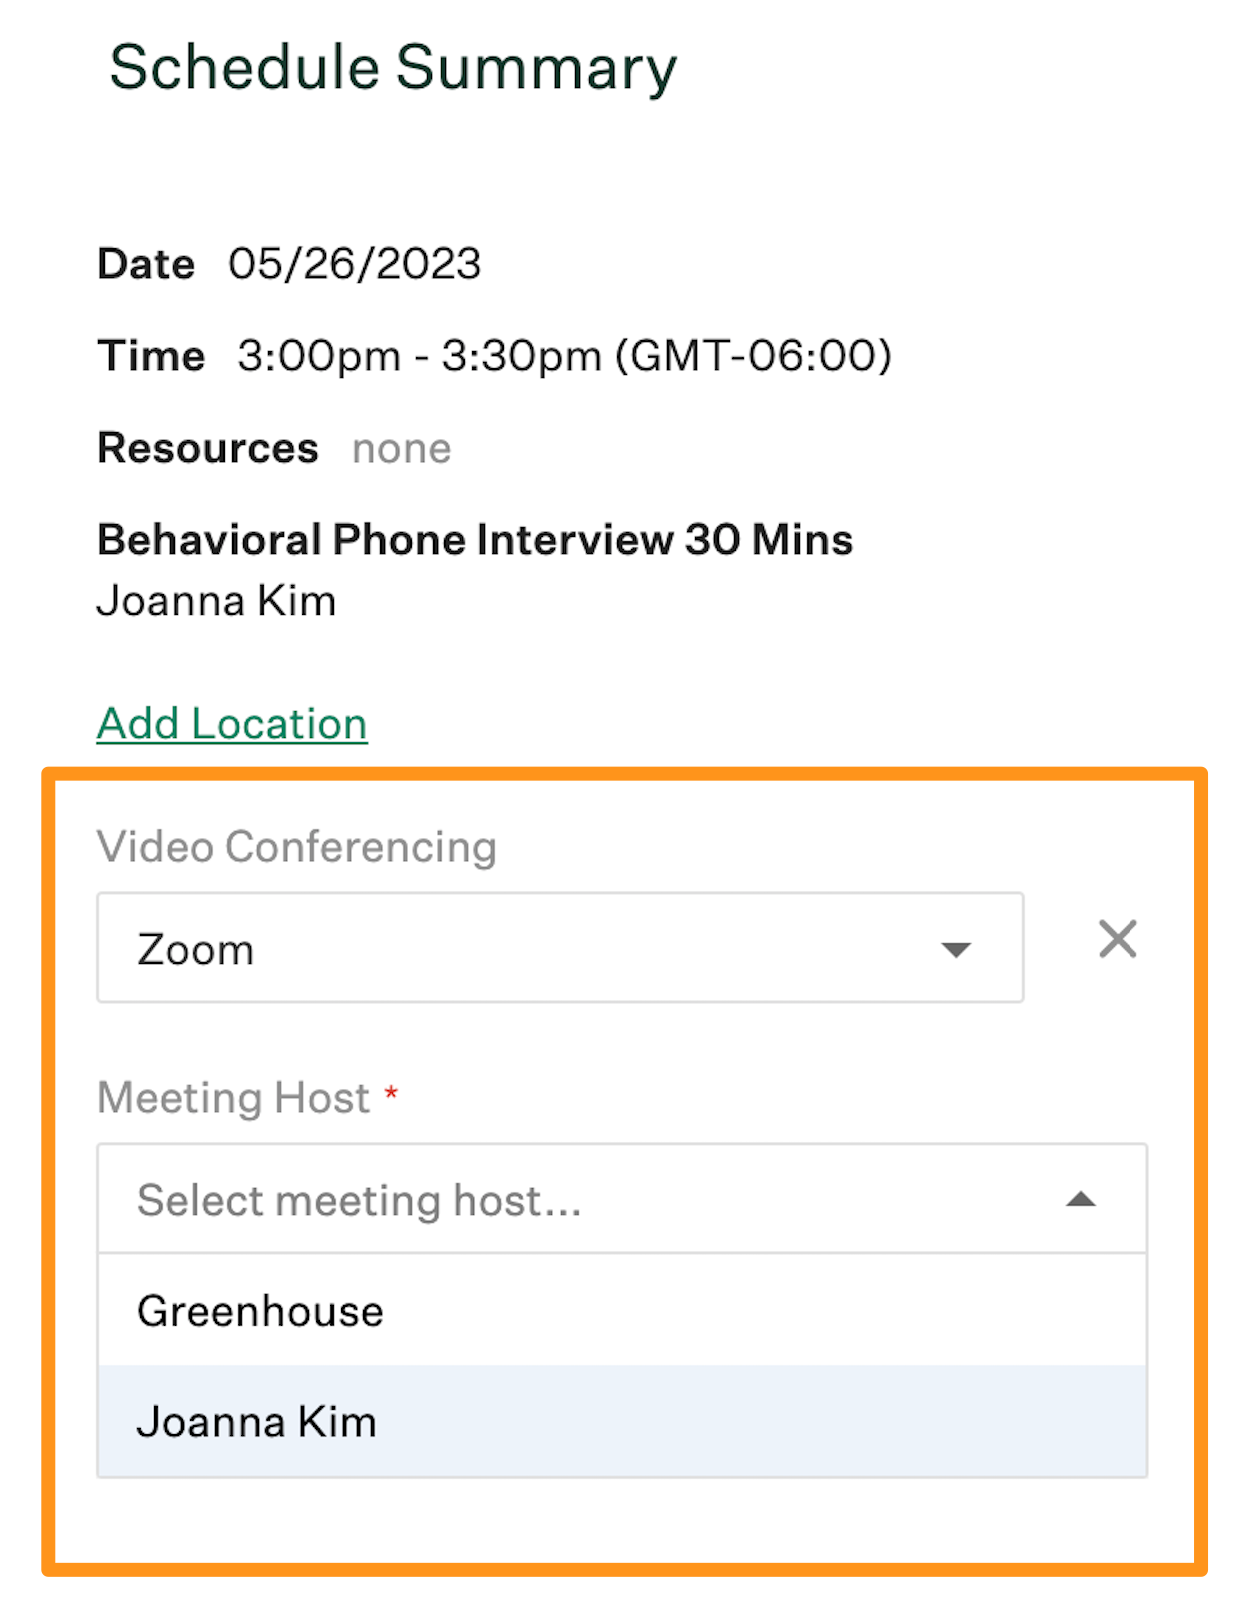 An example Zoom meeting is shown being configured with a list of users shown in the meeting host dropdown